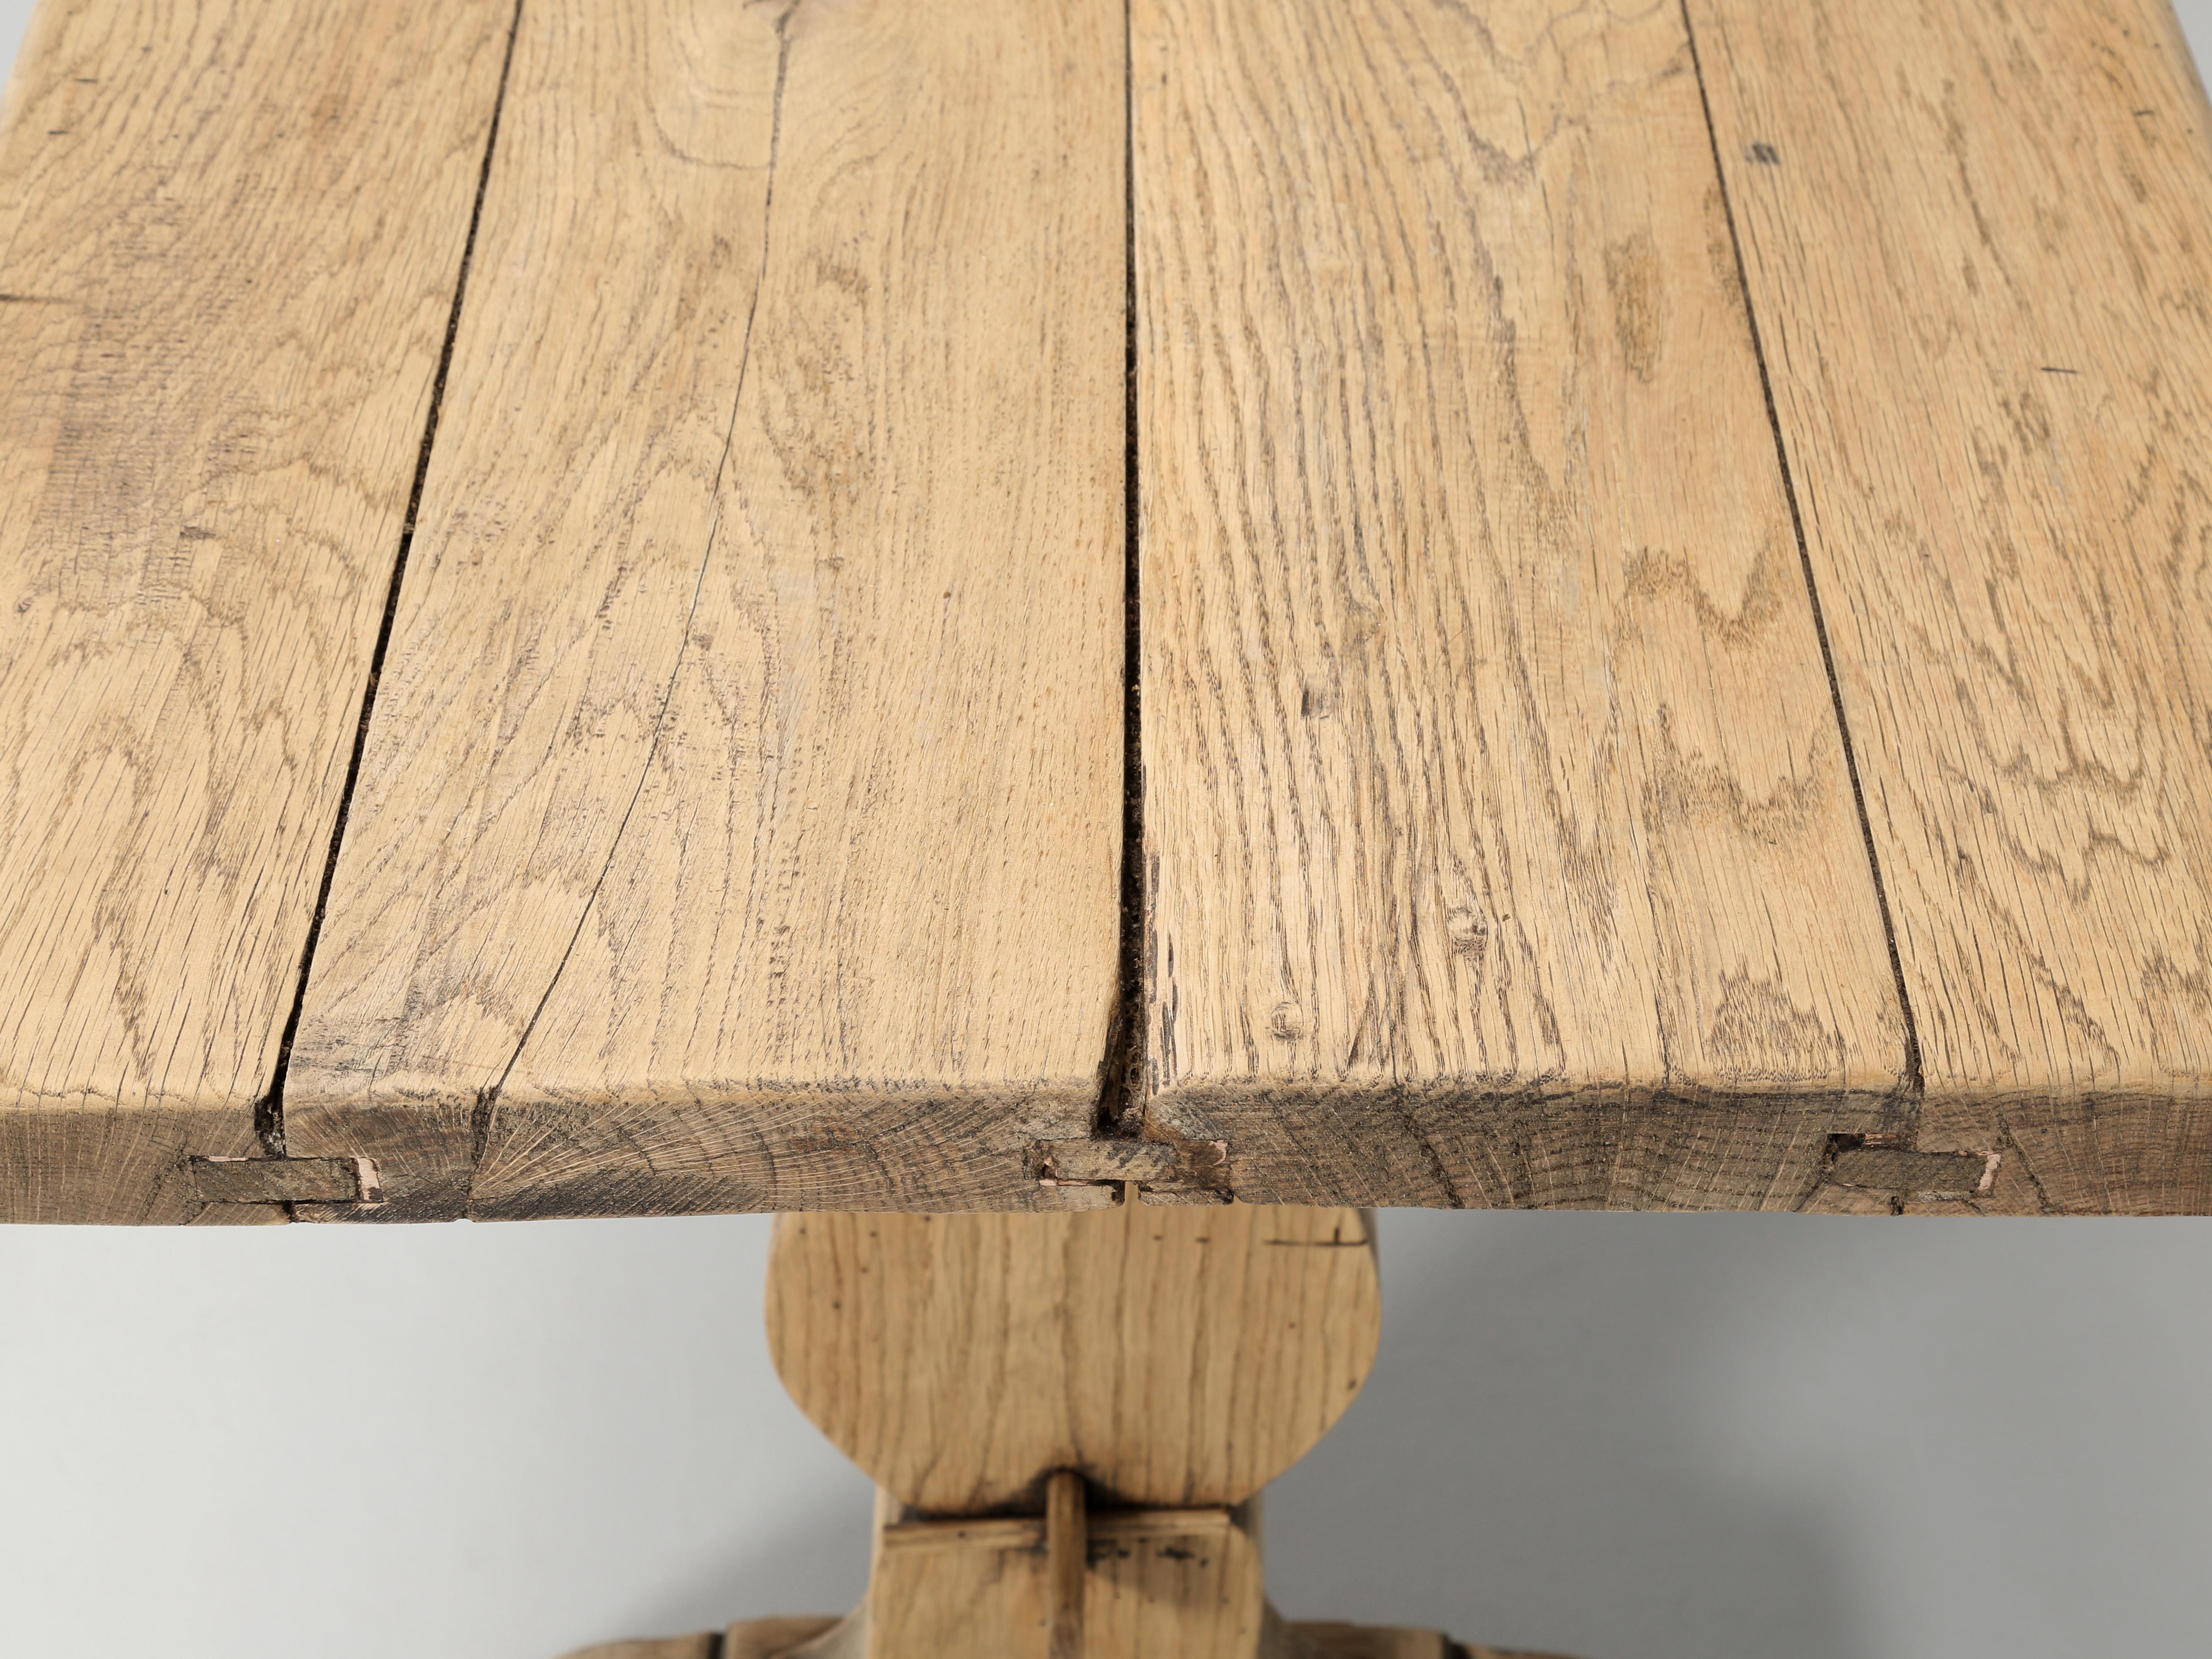 Antique French Bistro Table in Washed Natural White Oak, circa 1900-1920 1